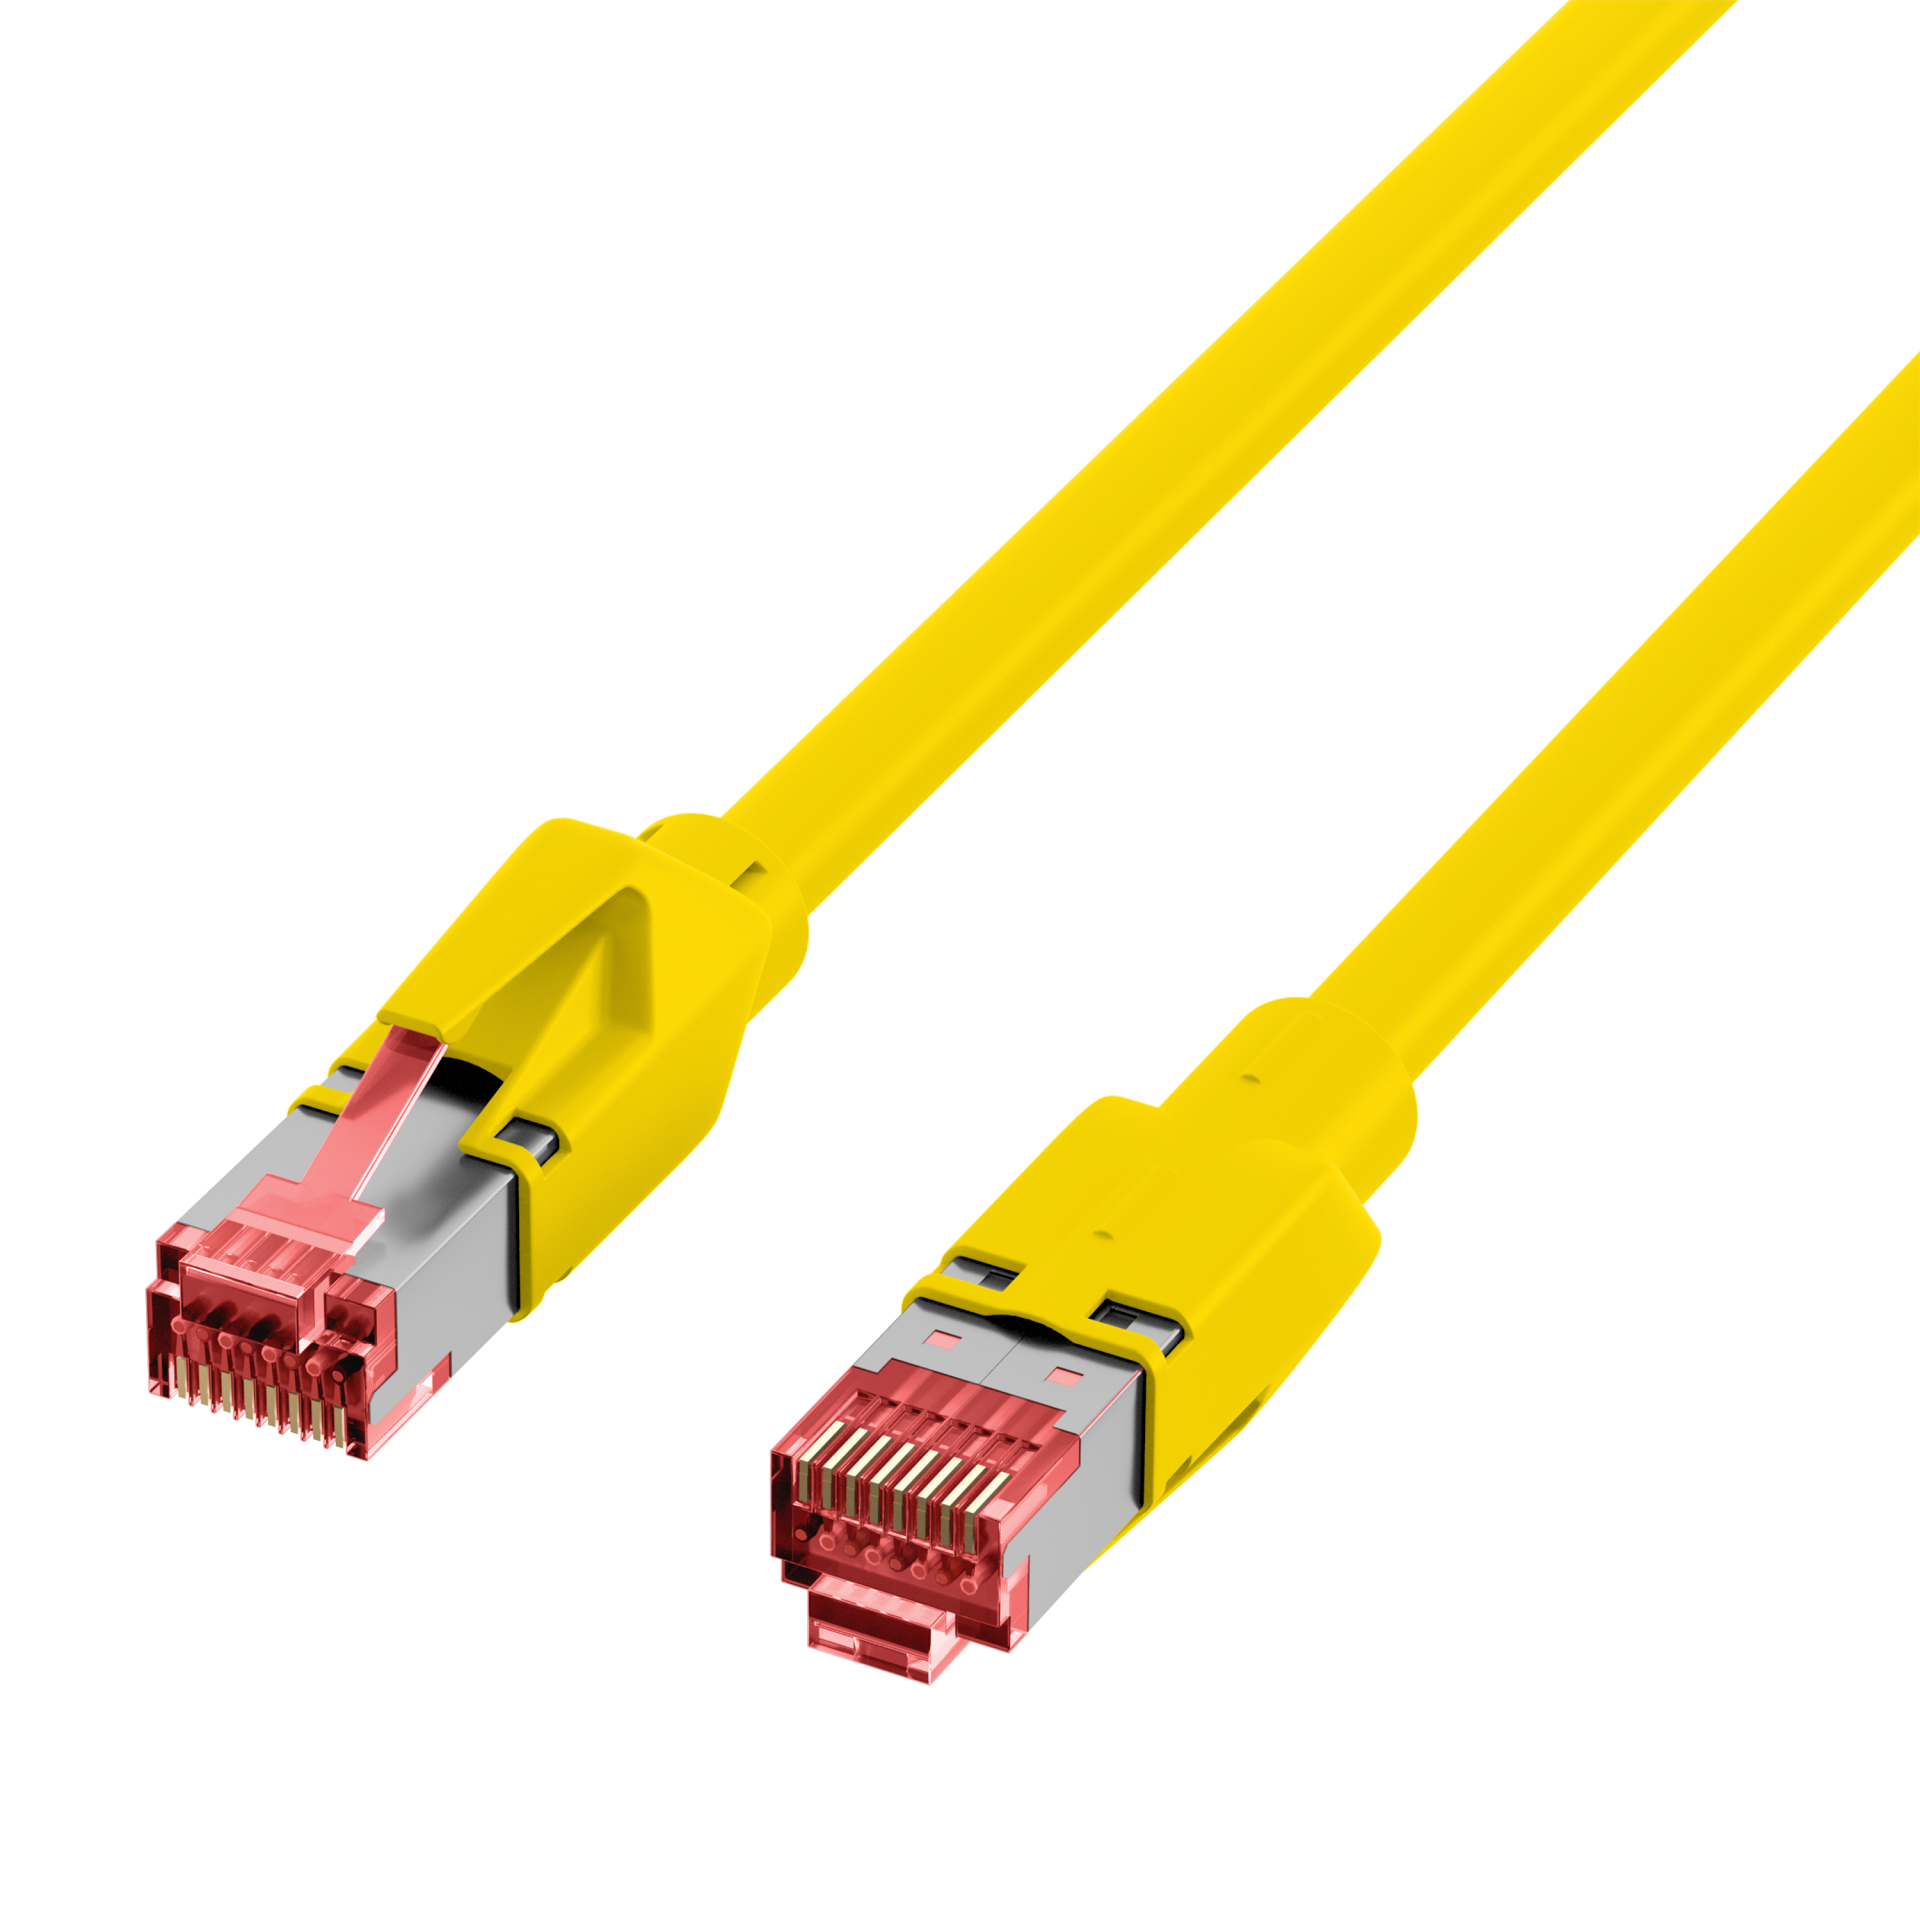 RJ45 Patch Cord Cat.5e SF/UTP PURTM21 for drag chains yellow 3m